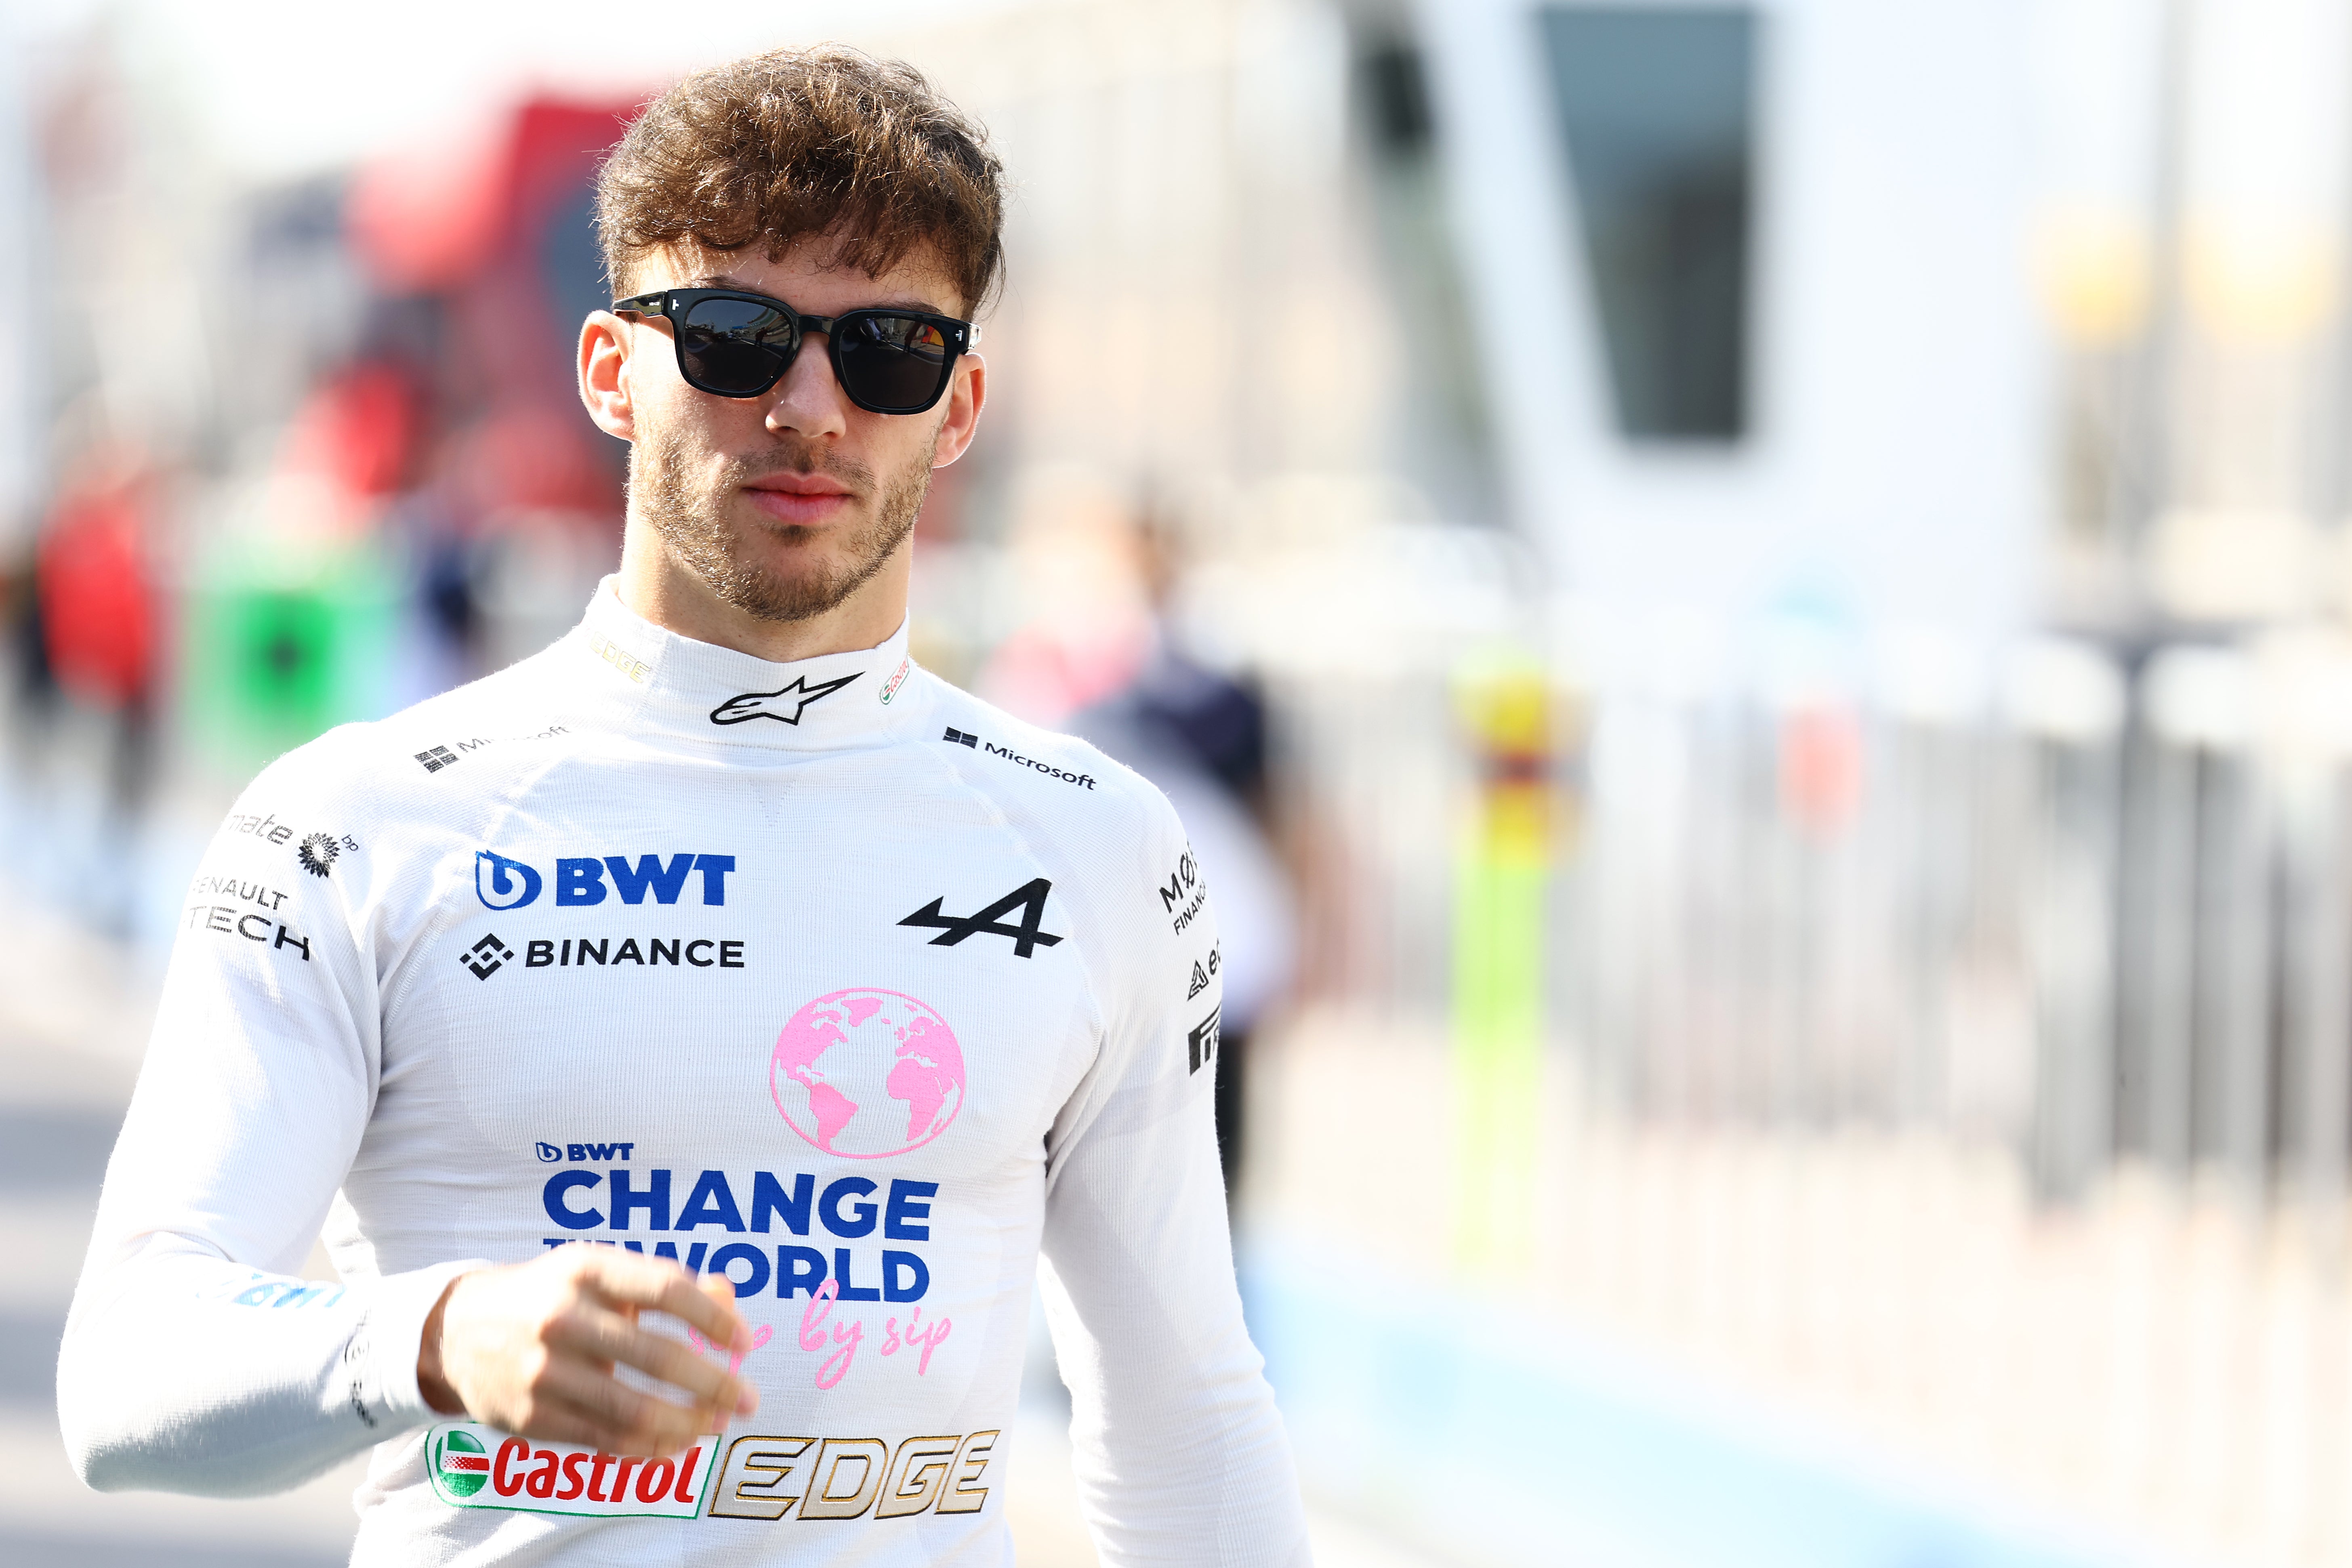 Pierre Gasly has moved to Alpine from AlphaTauri